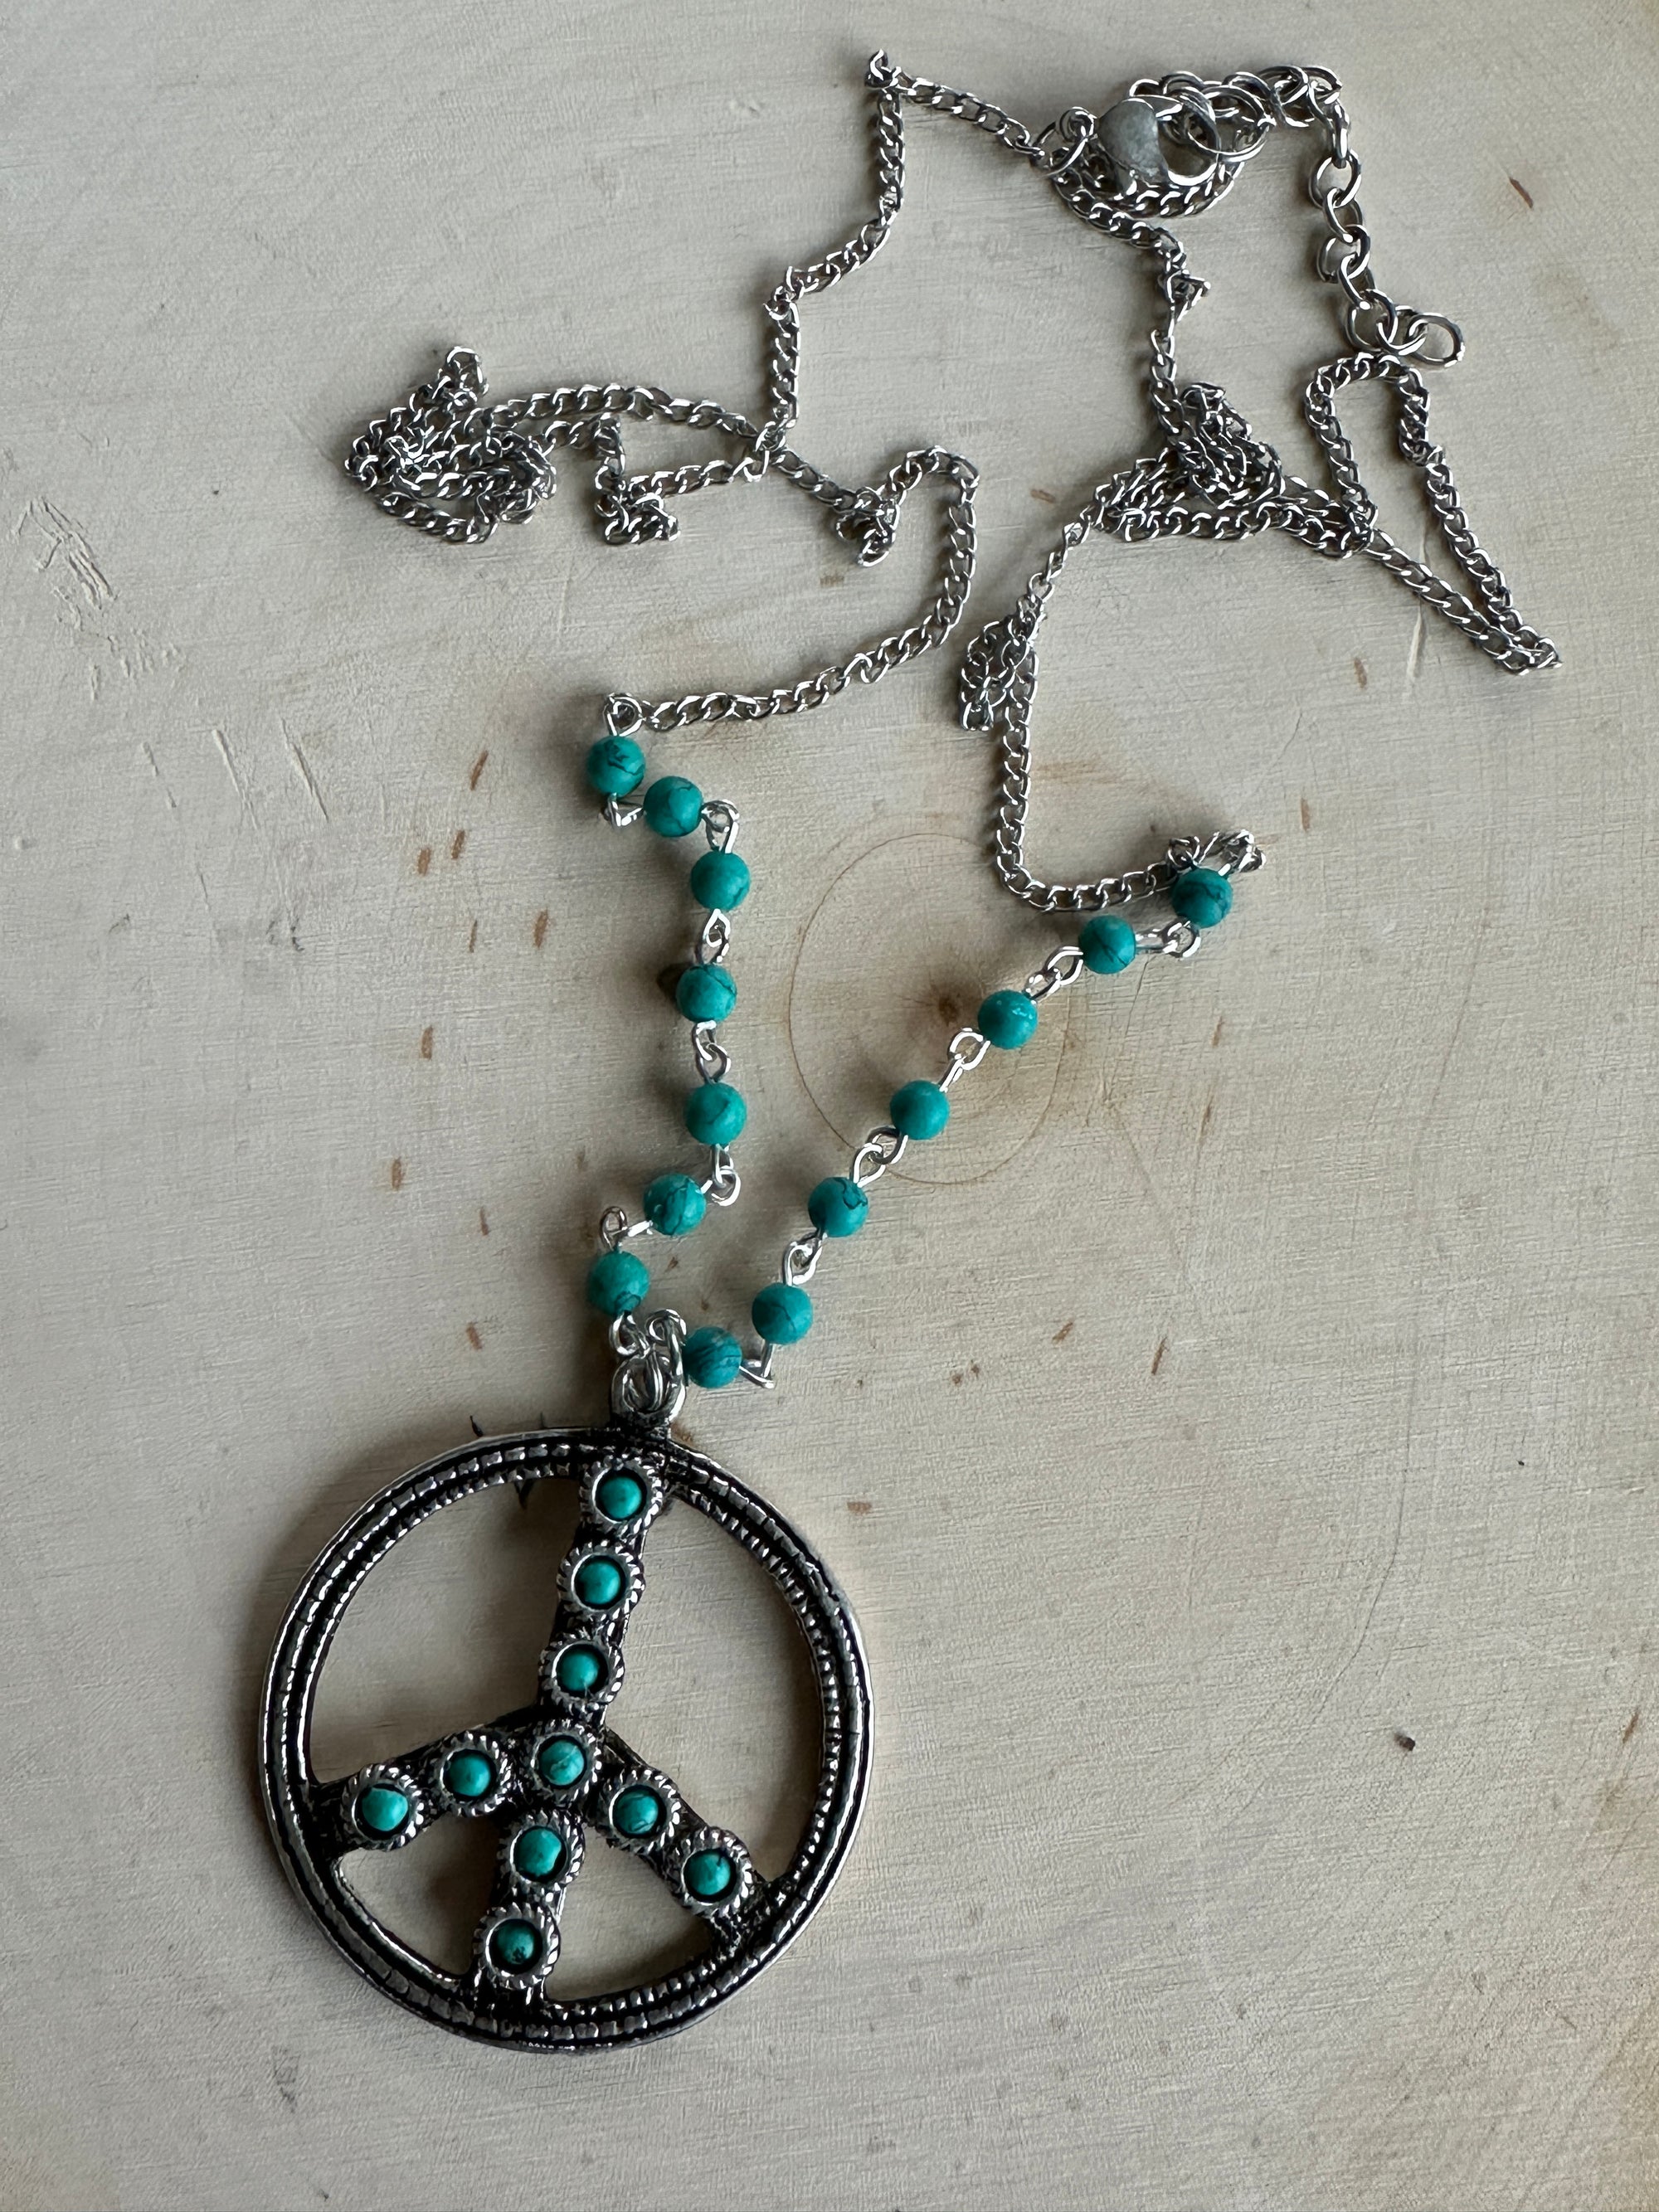 Small Turquoise Peace Necklace